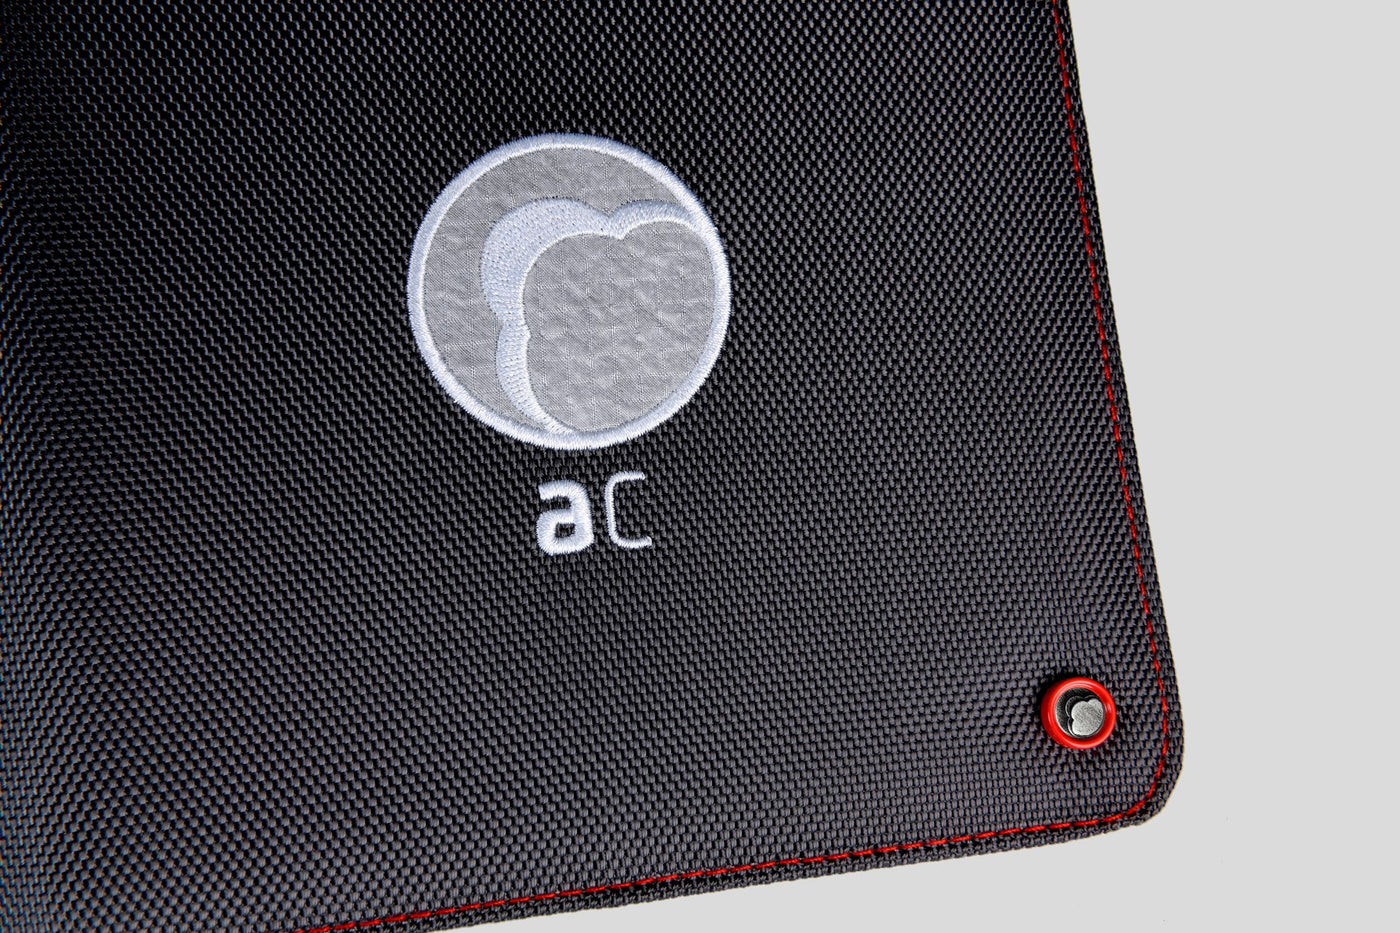 Notebook folder from our "Artifactcloud" apparel collection. With iPad holder inside.